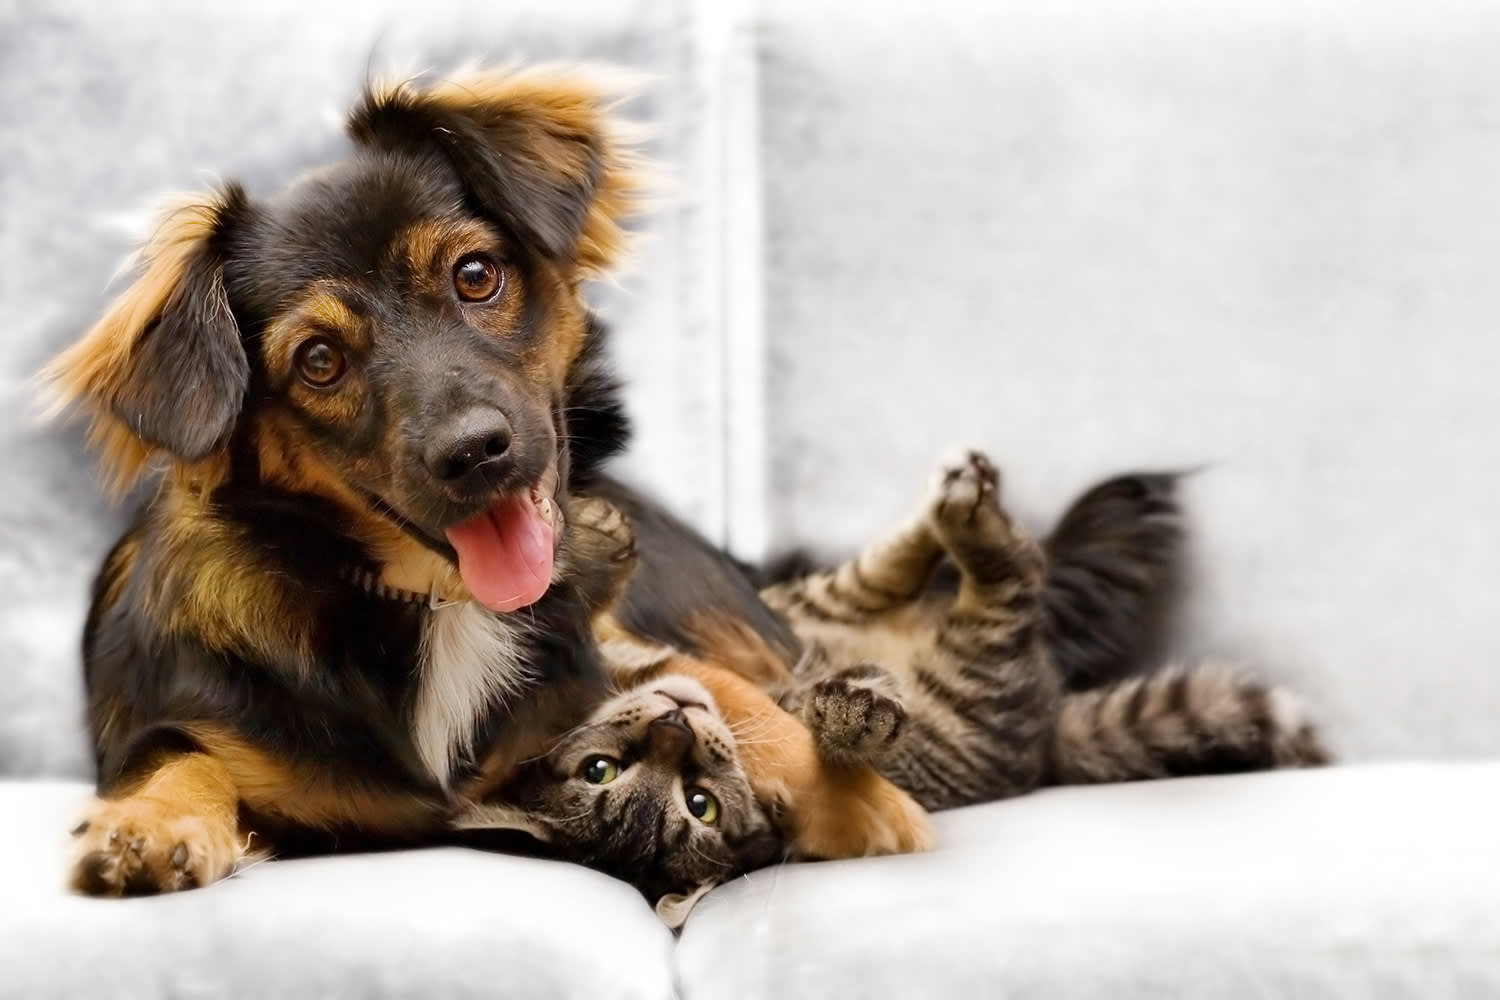 Dark brown dog and cat on a sofa looking happy together.